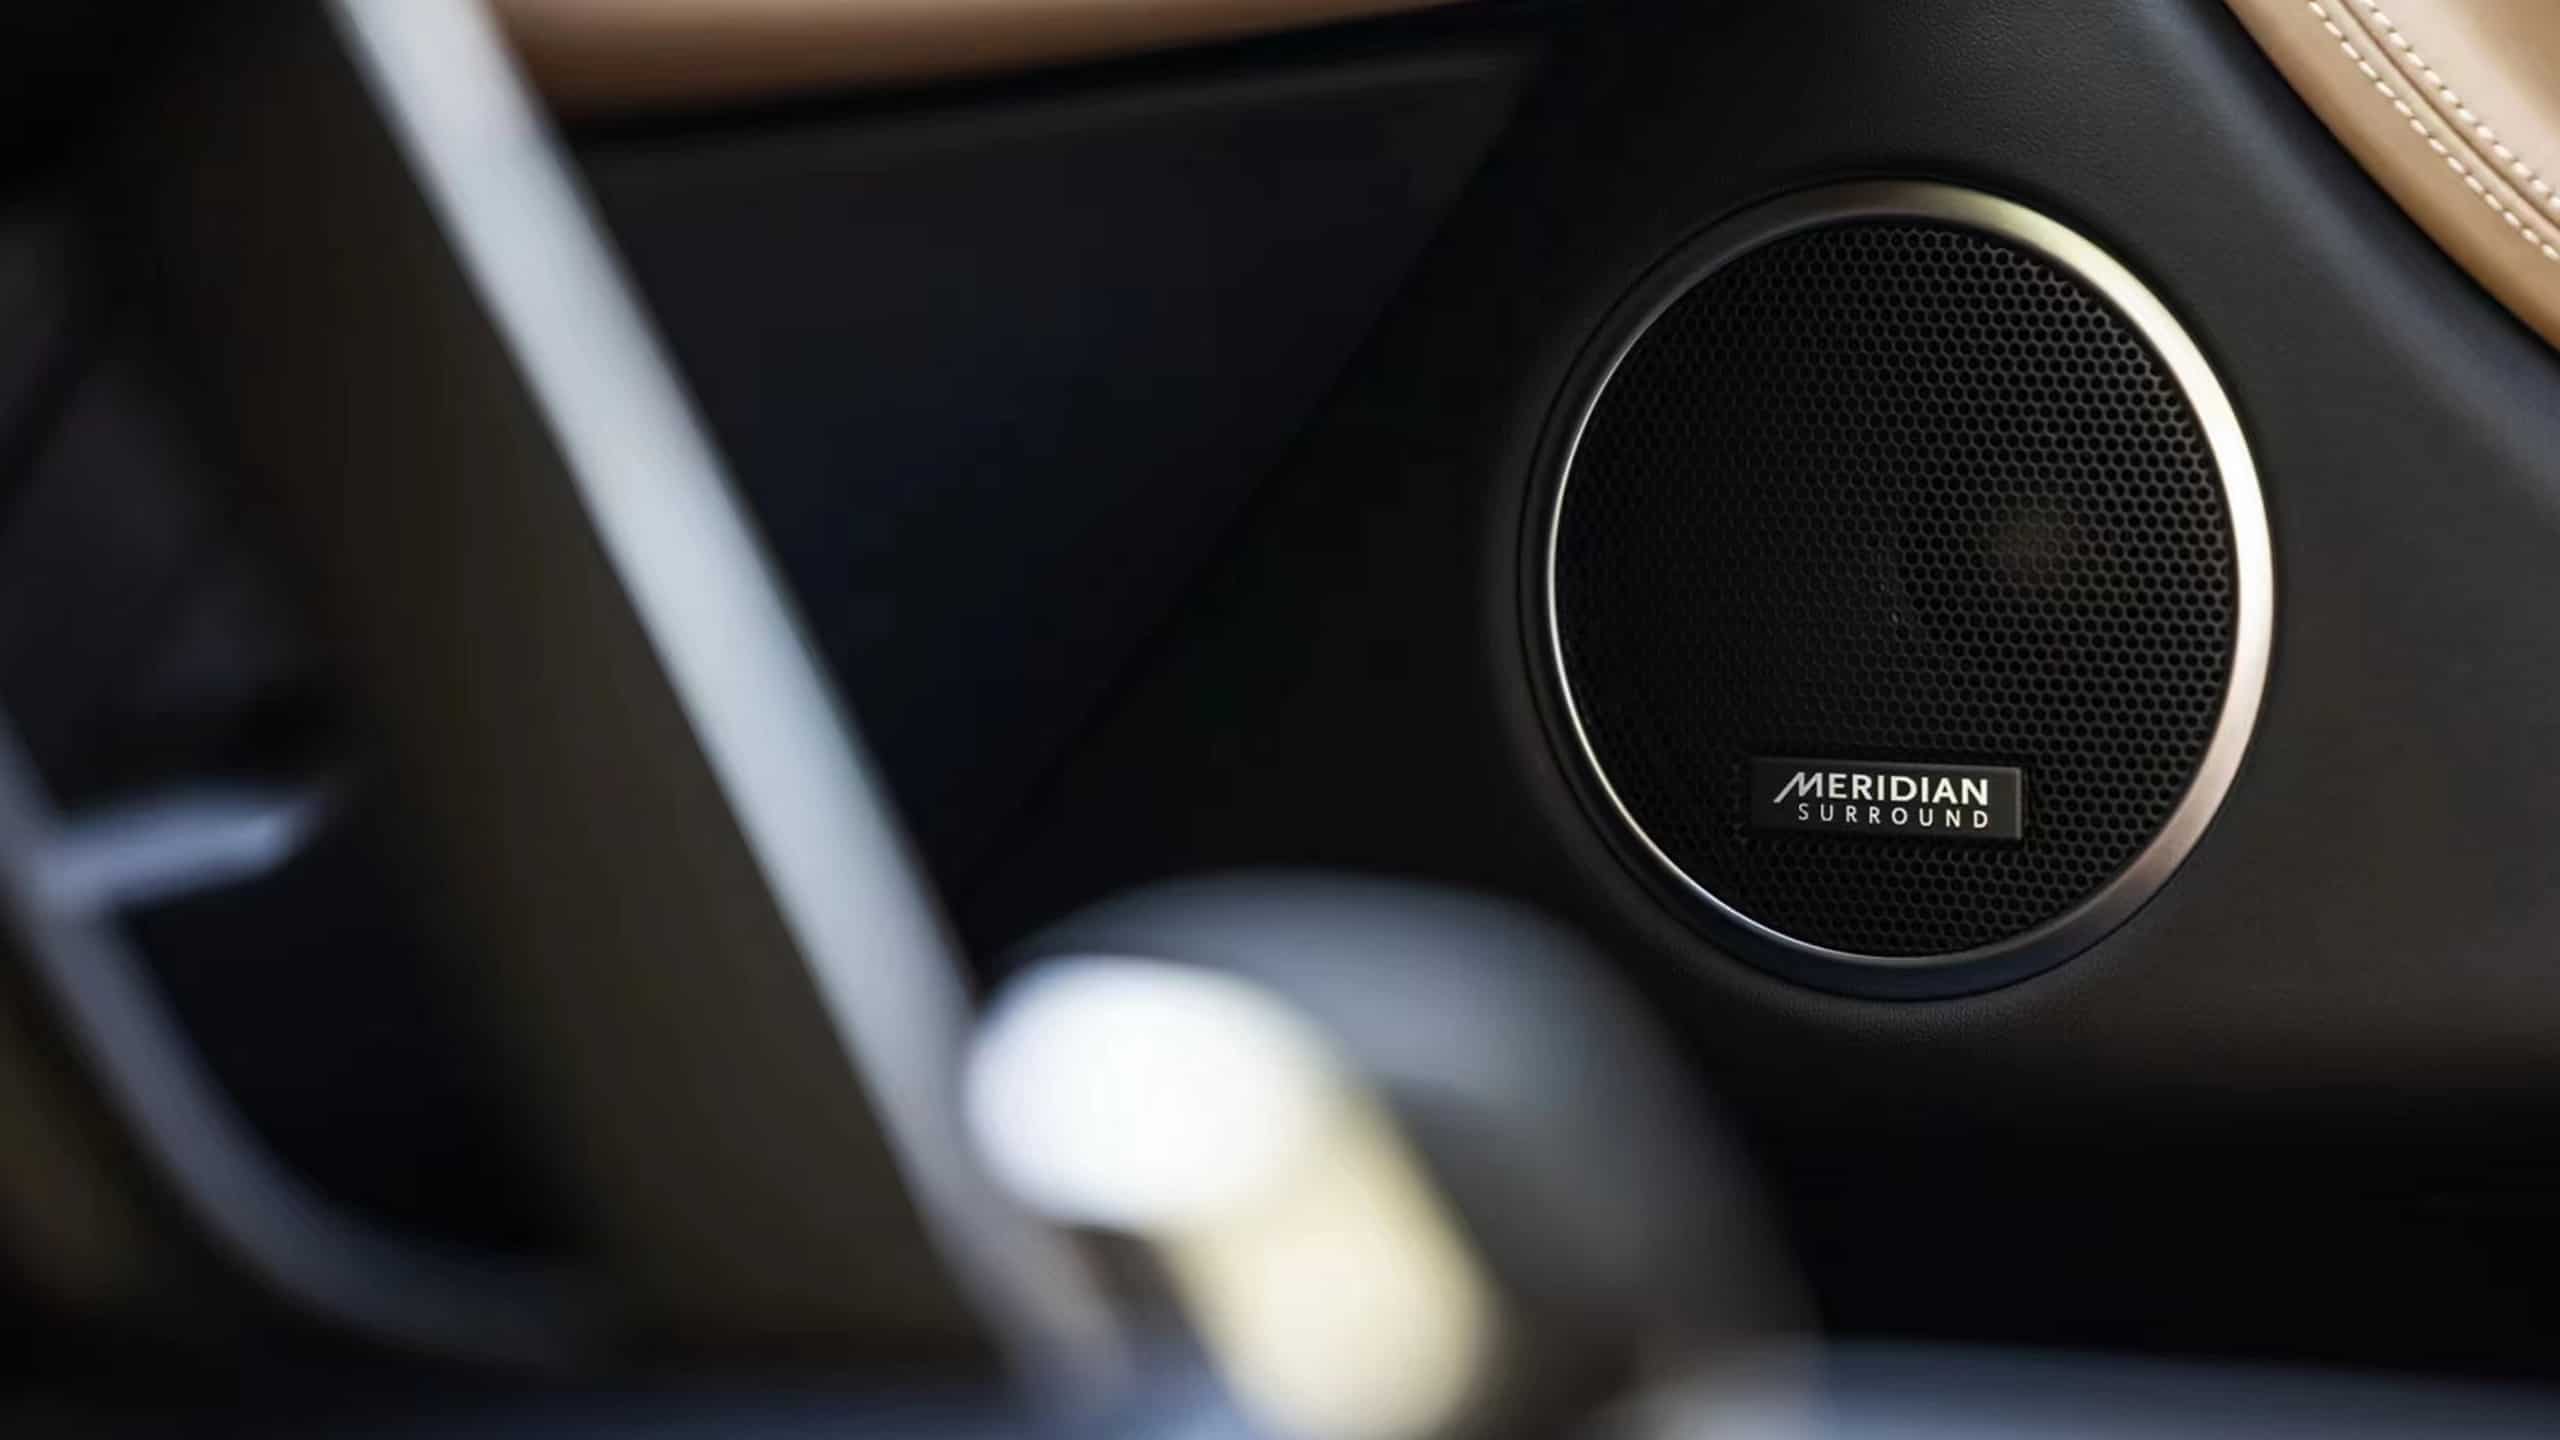 New Discovery Sport audio system